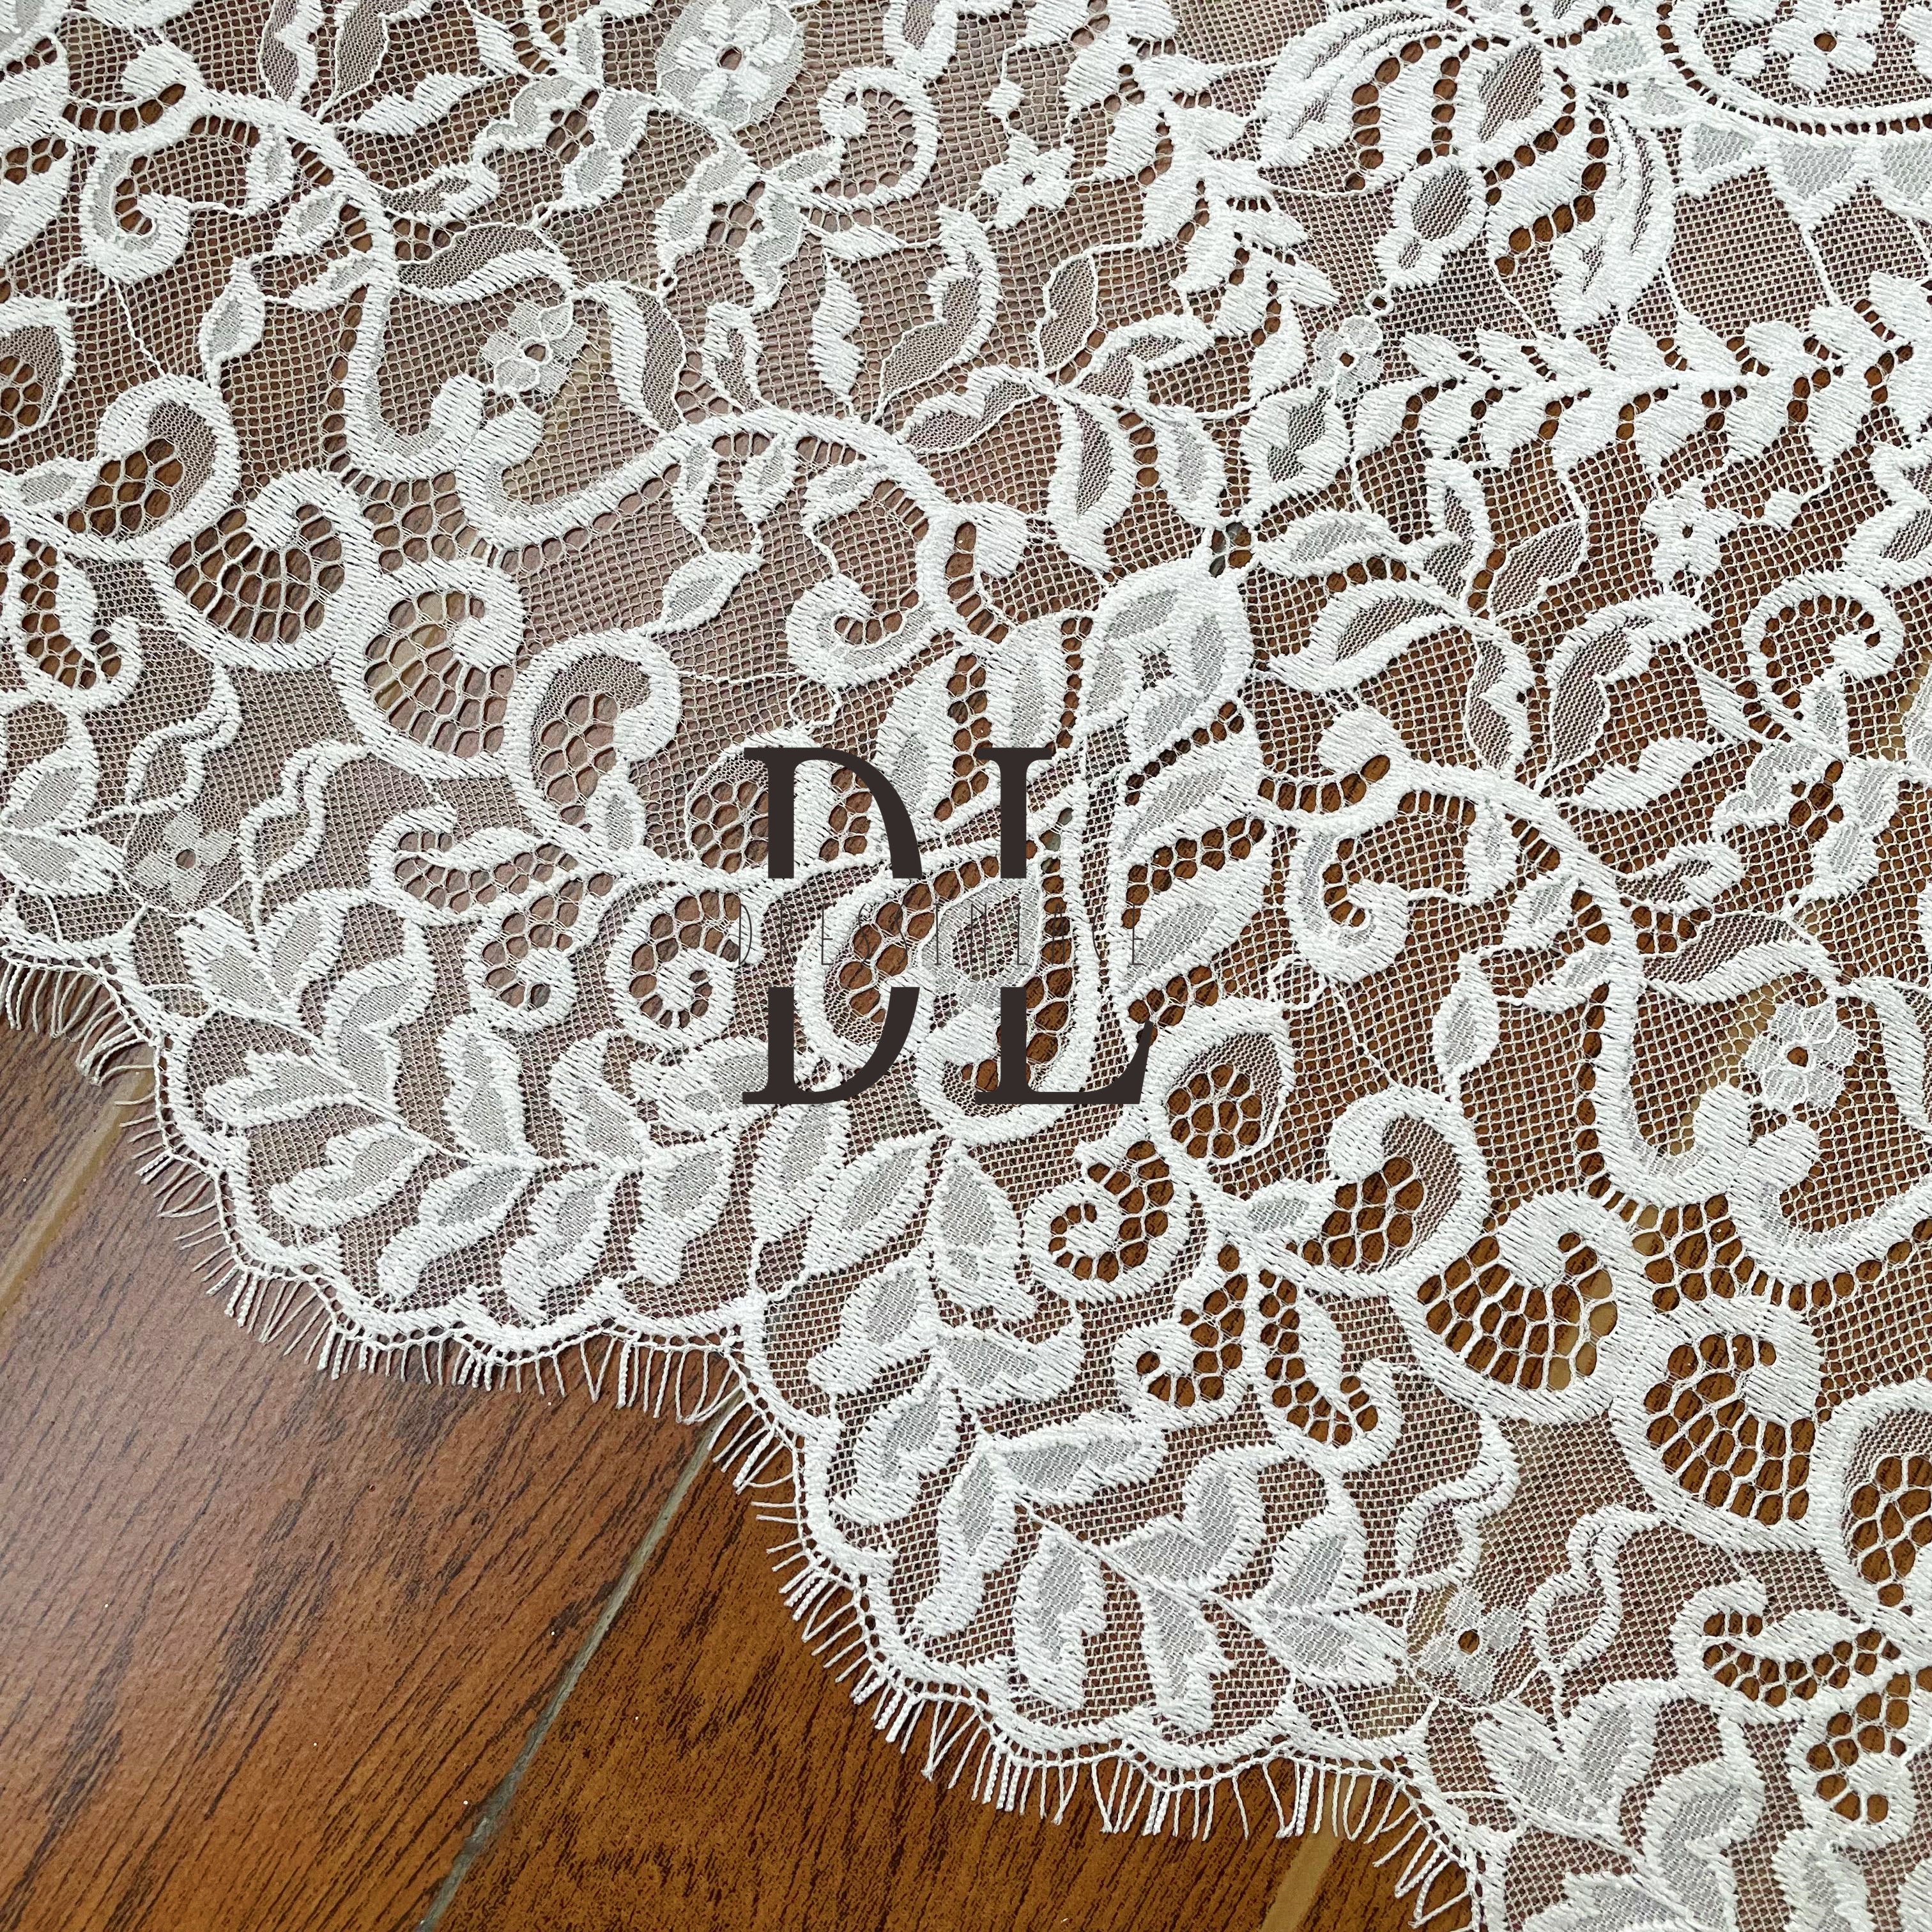 DL15101 French lace eyelash fabric for Wedding Dress - Soft and Exquisite Eyelash Material 3yards per pieces